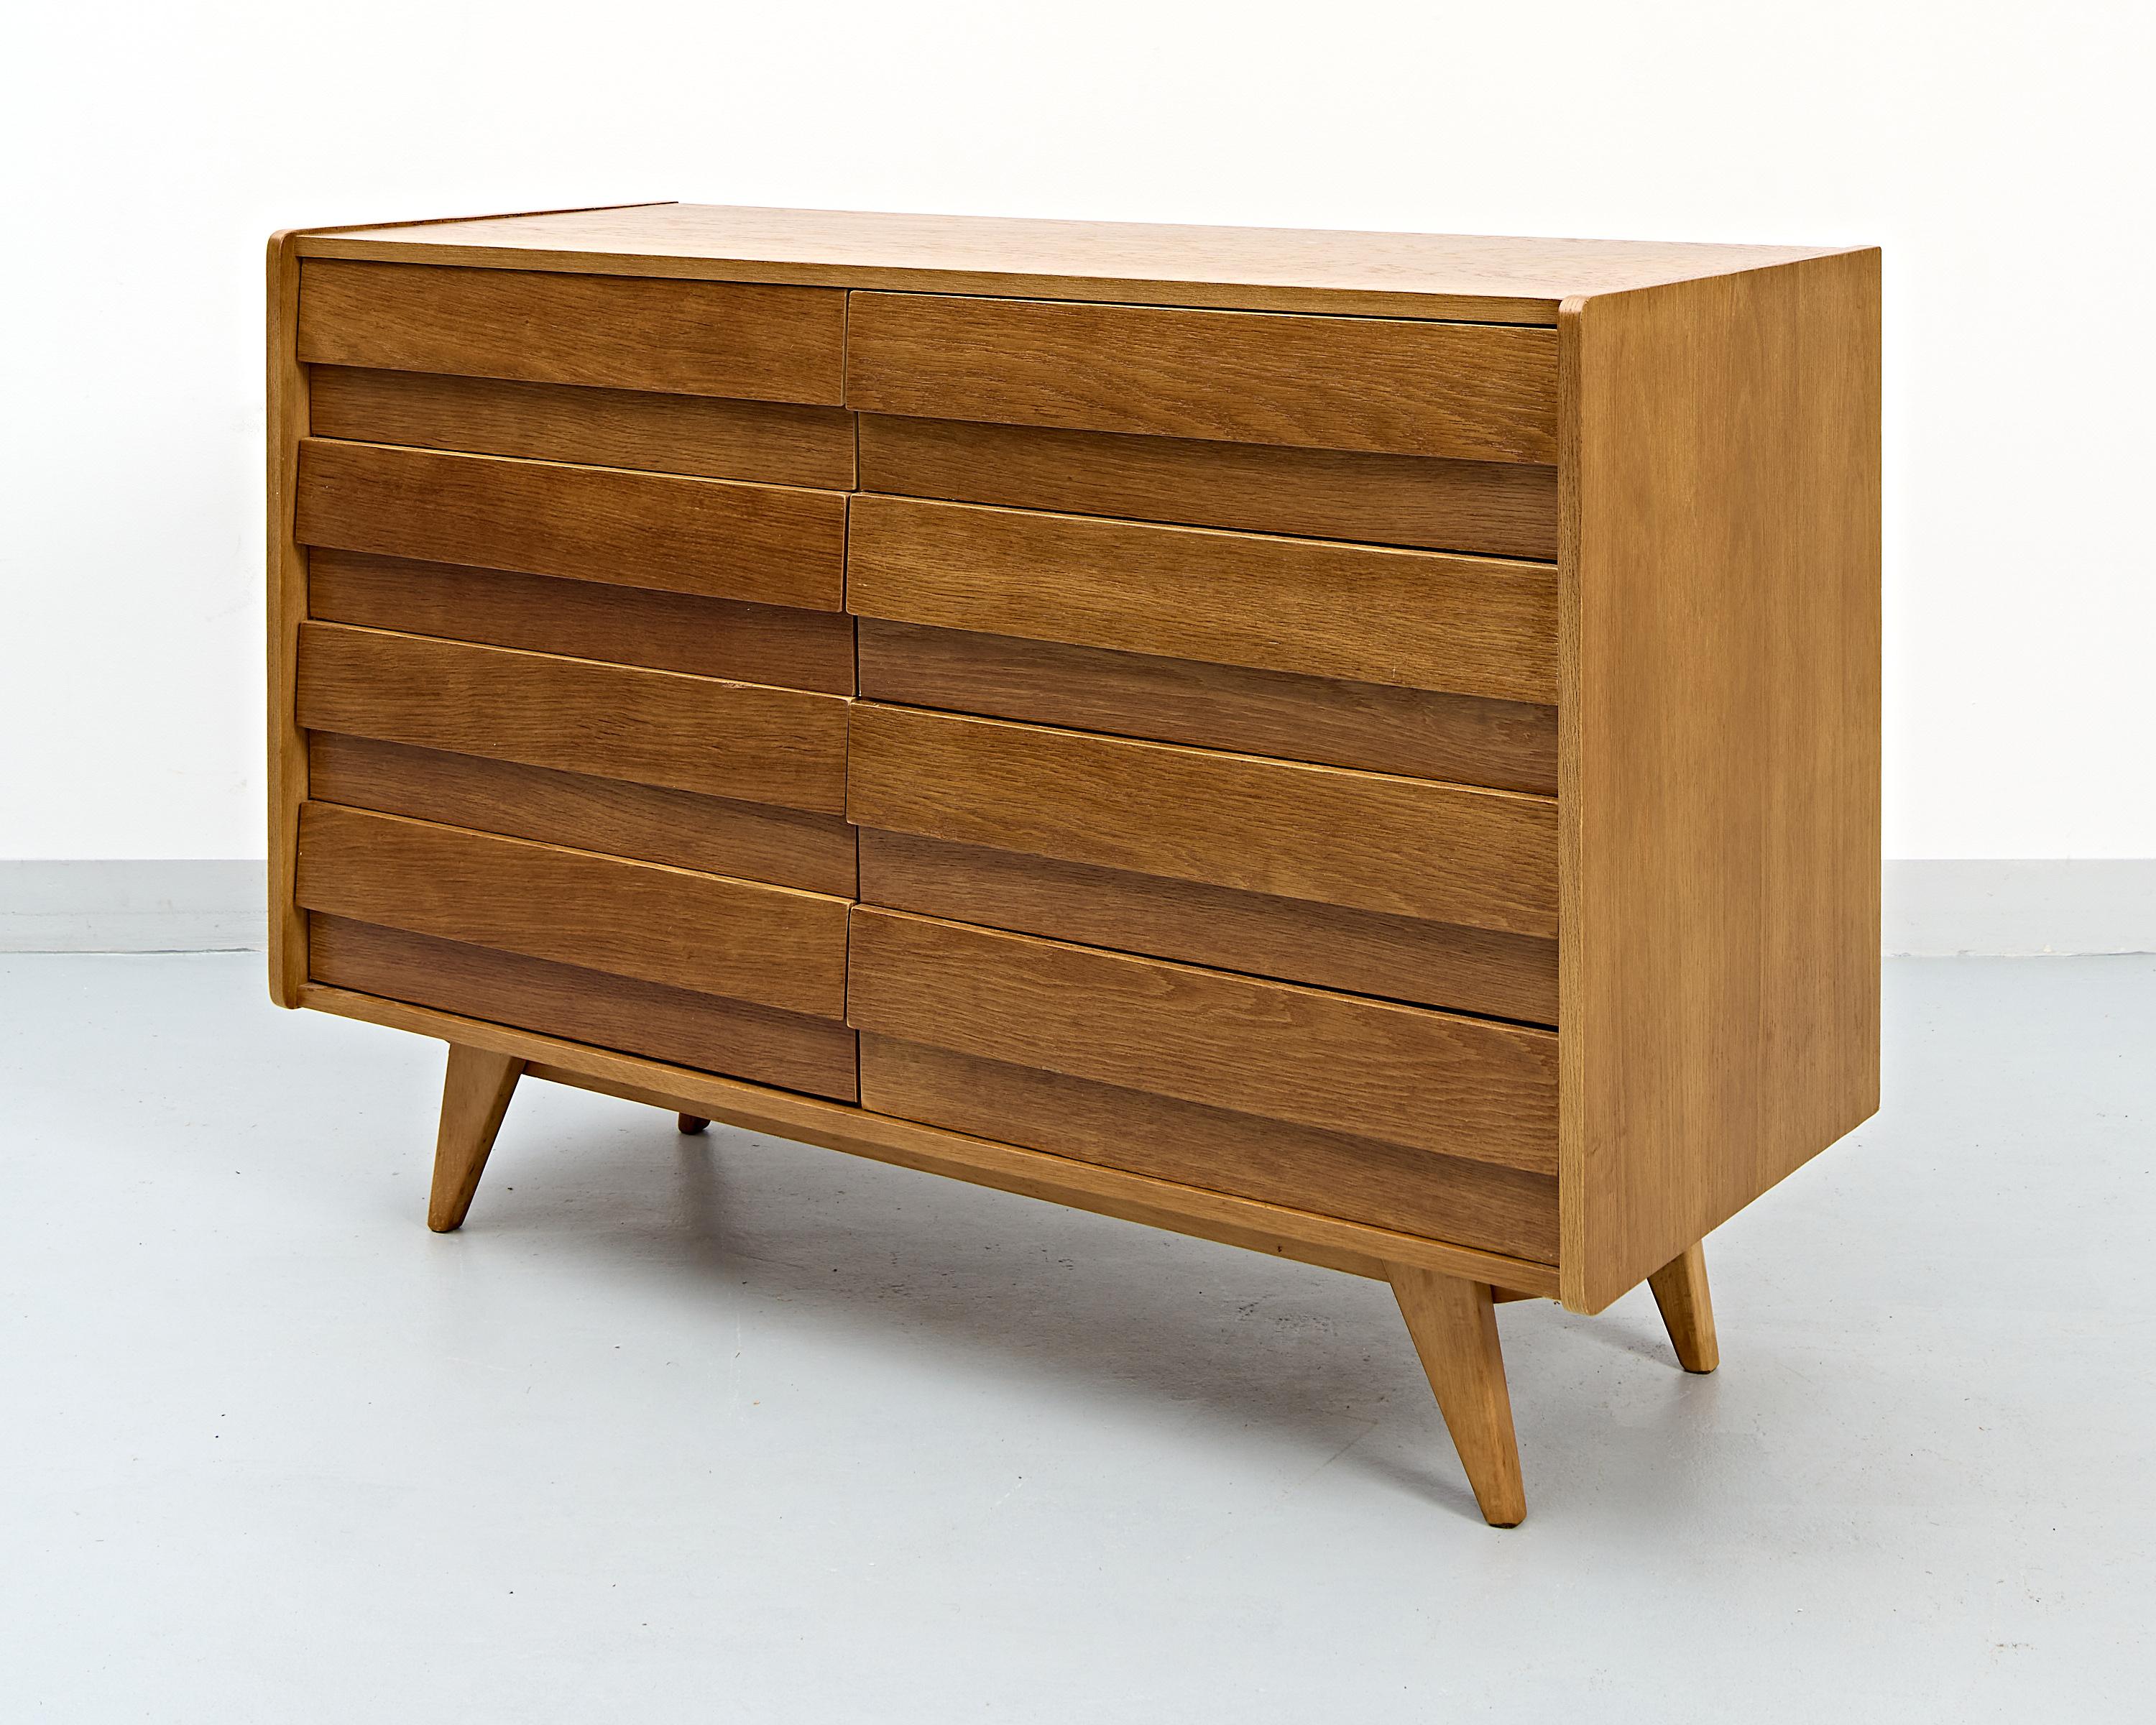 The U-453 sideboard designed by the czech designer Jiří Jiroutek as a part of the U series. Works began after the enormous success of the czech pavilion at the Brussels ’58 expo and the series became one of the leading examples of the newly formed